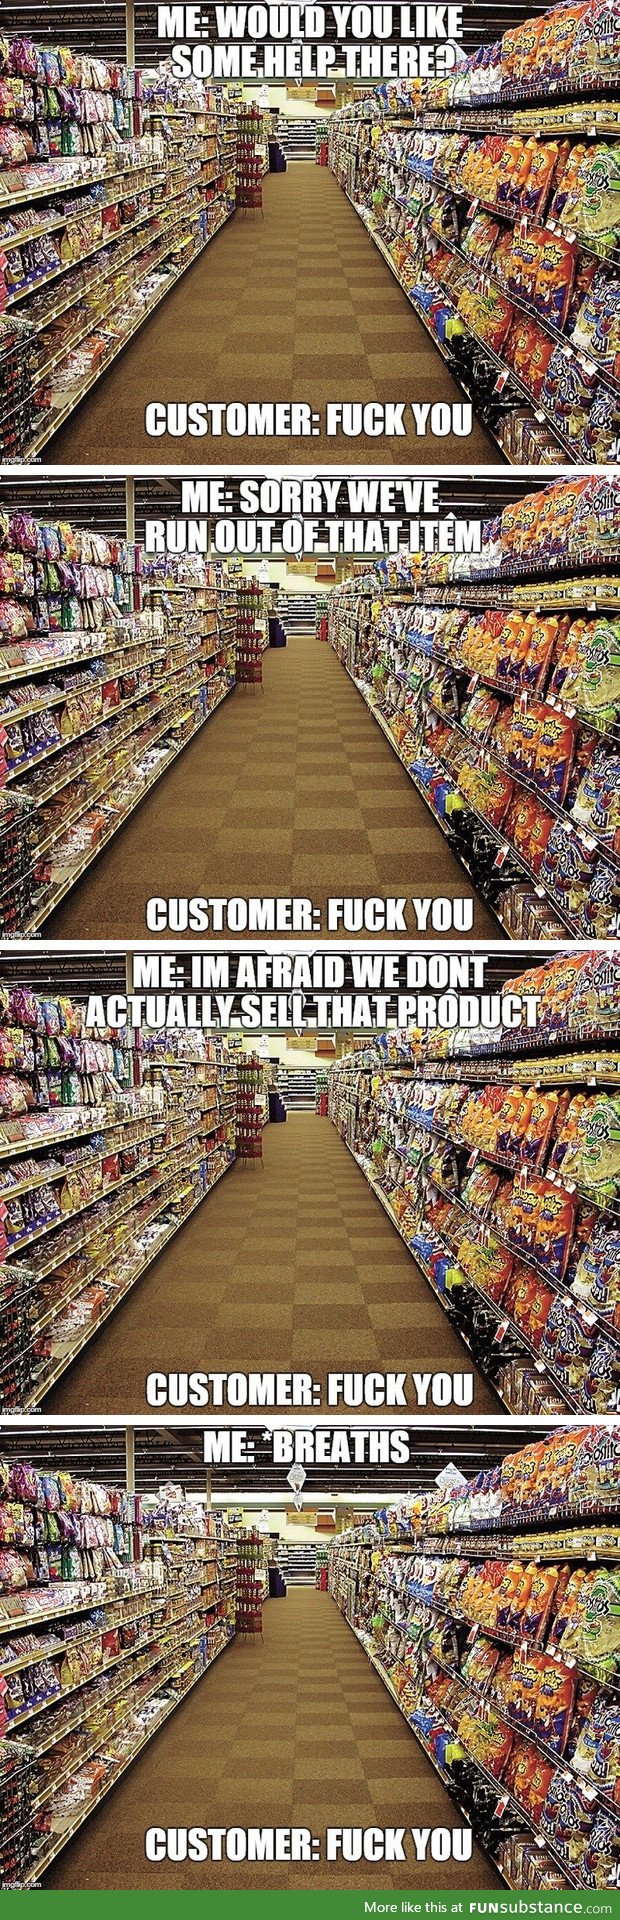 Working in retail